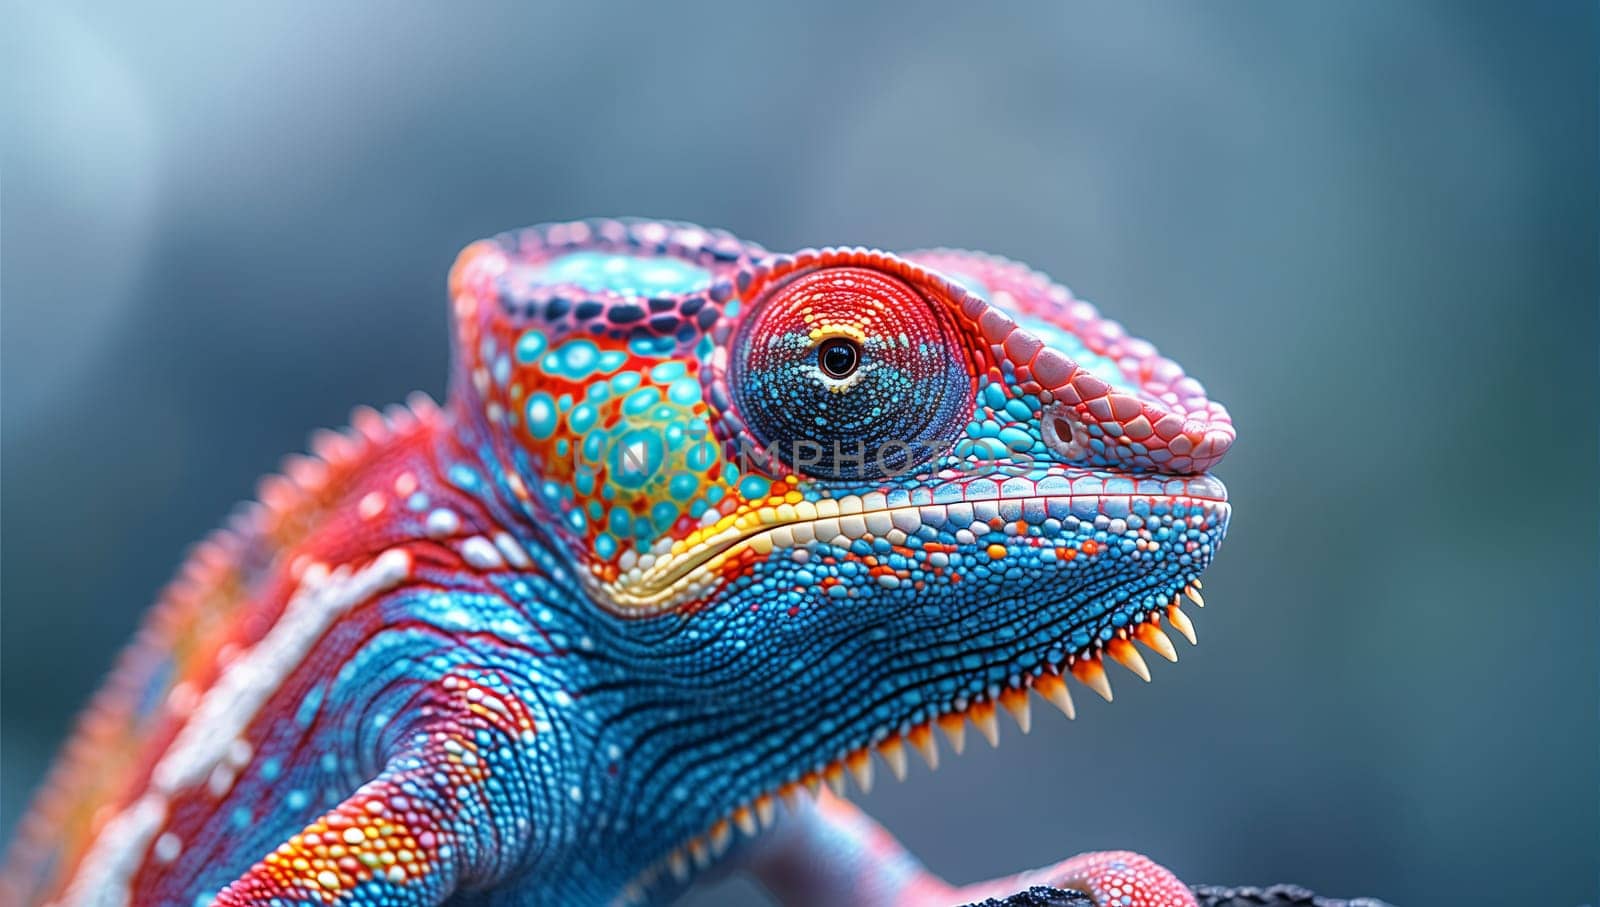 Electric blue scaled reptile on branch making eye contact with camera by richwolf